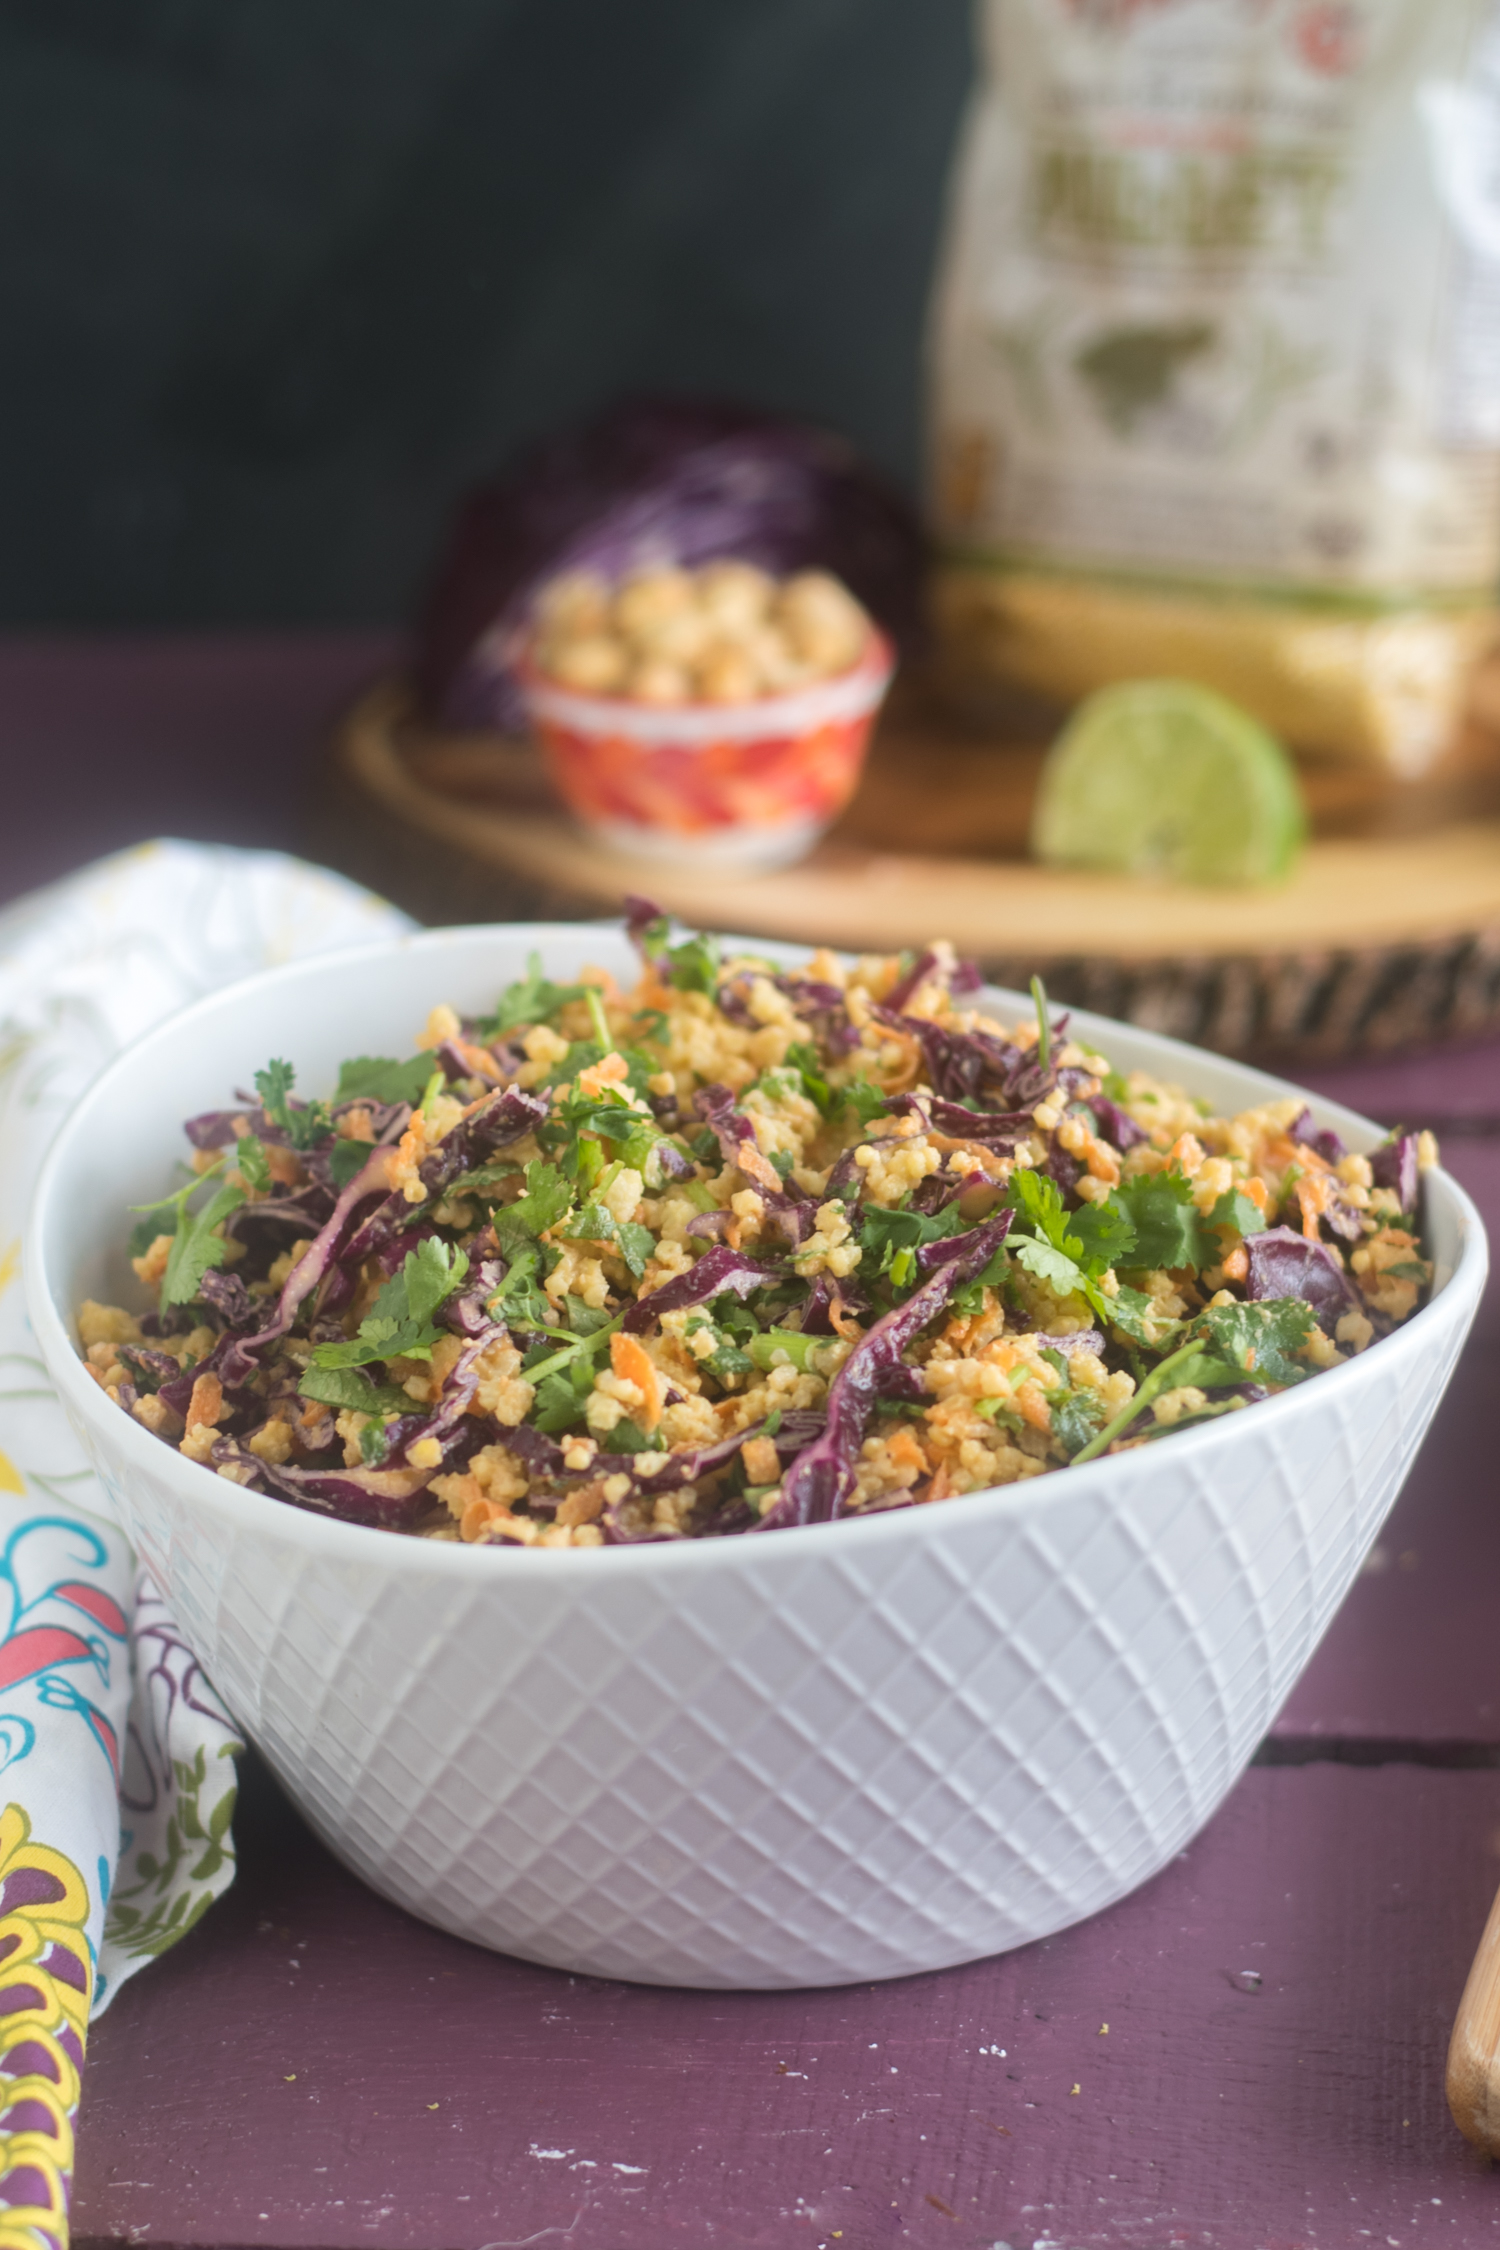 This Vegan Thai Peanut Millet Salad is fresh, budget-friendly, and loaded with nutrients and fiber.